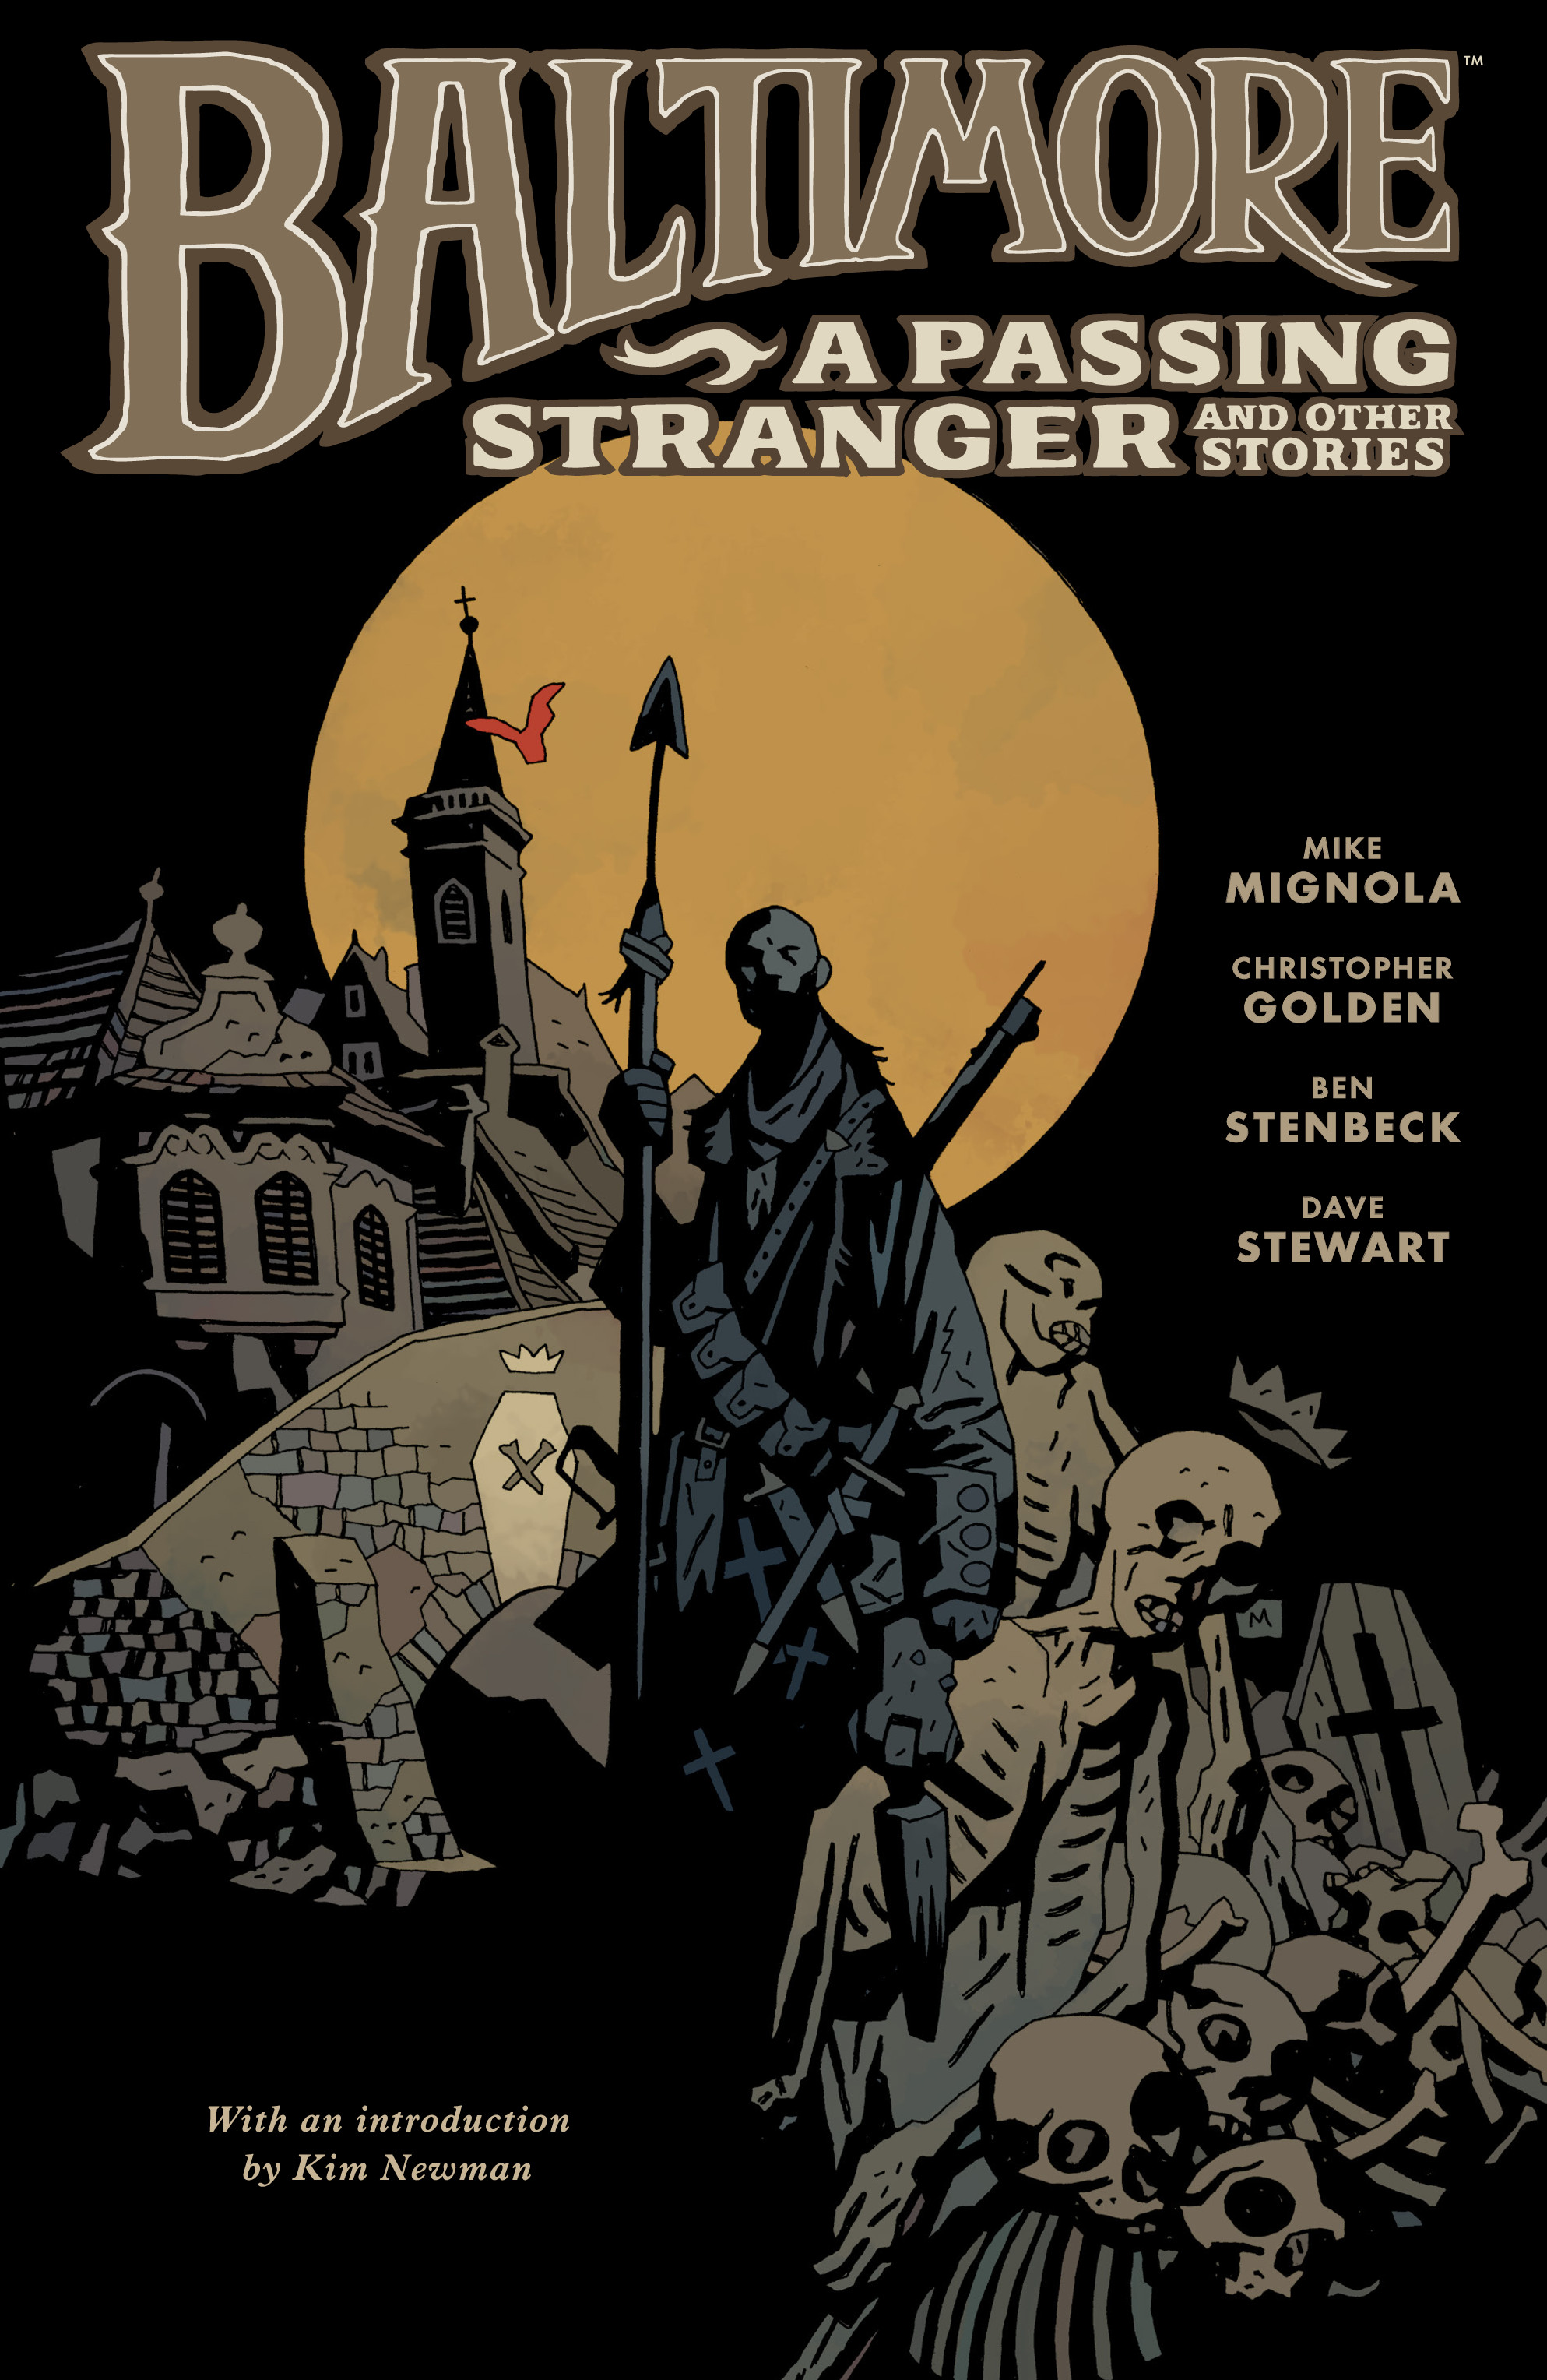 Read online Baltimore Volume 3: A Passing Stranger and Other Stories comic -  Issue # Full - 1